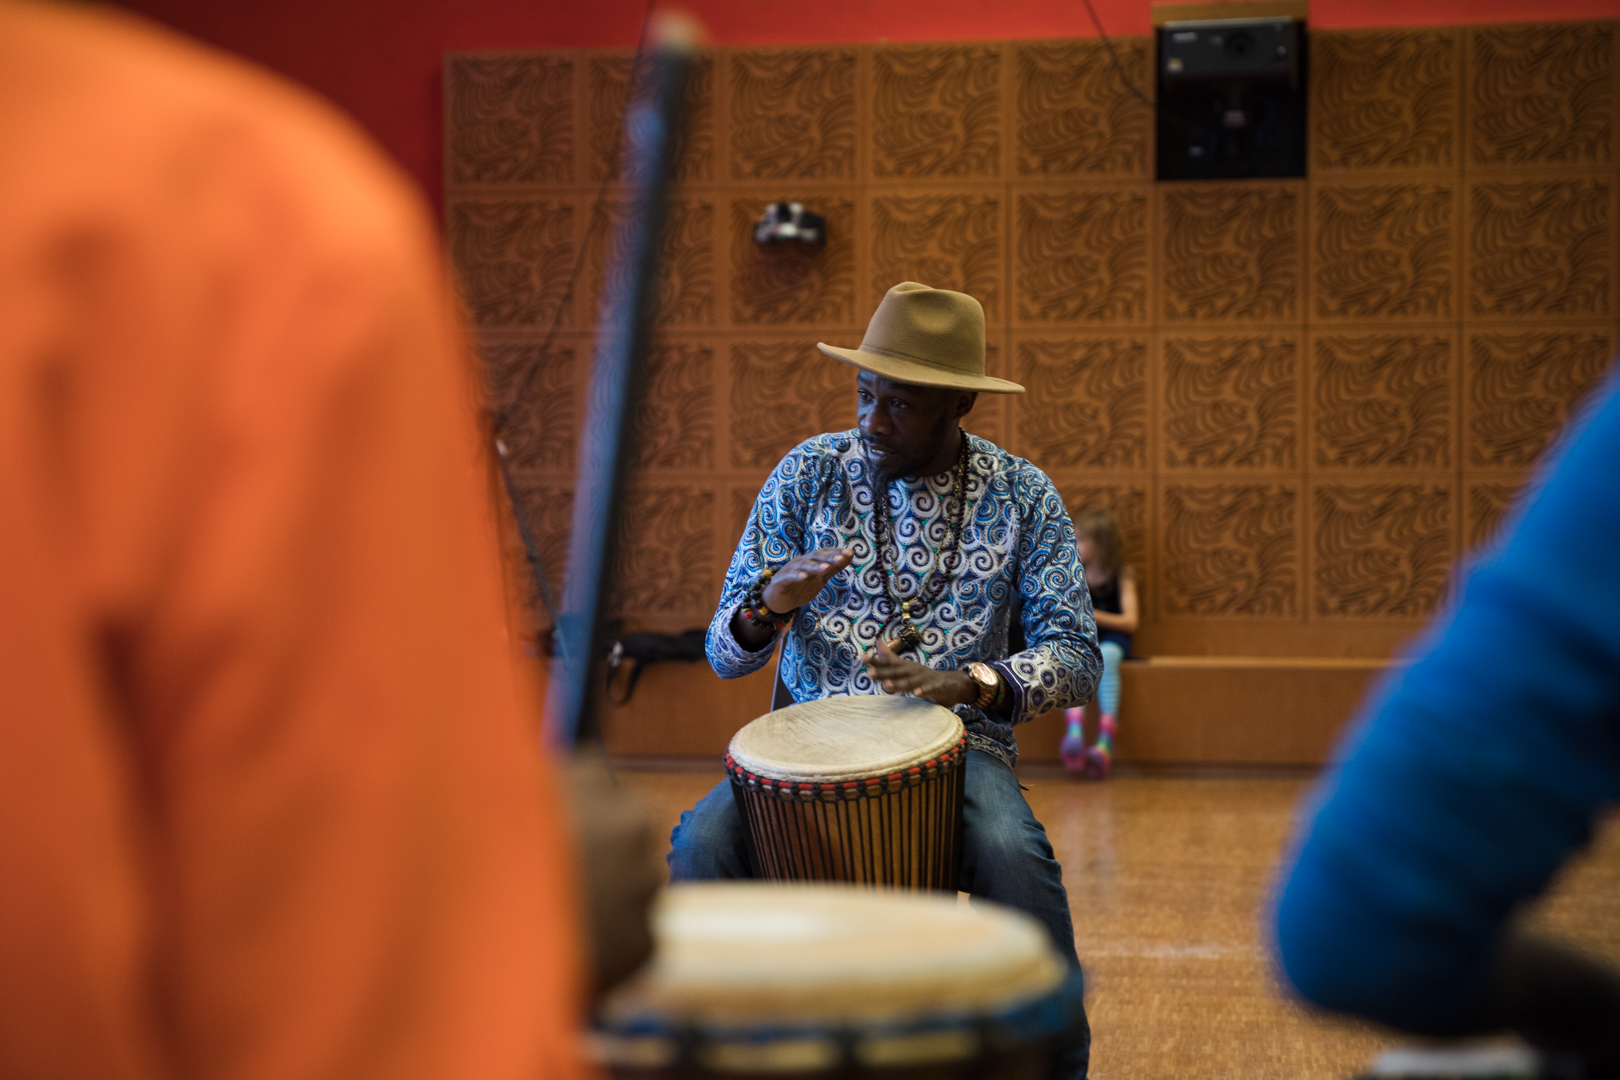 Asase Yaa Cultural Arts Foundation pitched a celebration with a variety of classes, like Yao Ababio's Djembe drum class. Photo: Paul Frangipane/Brooklyn Eagle